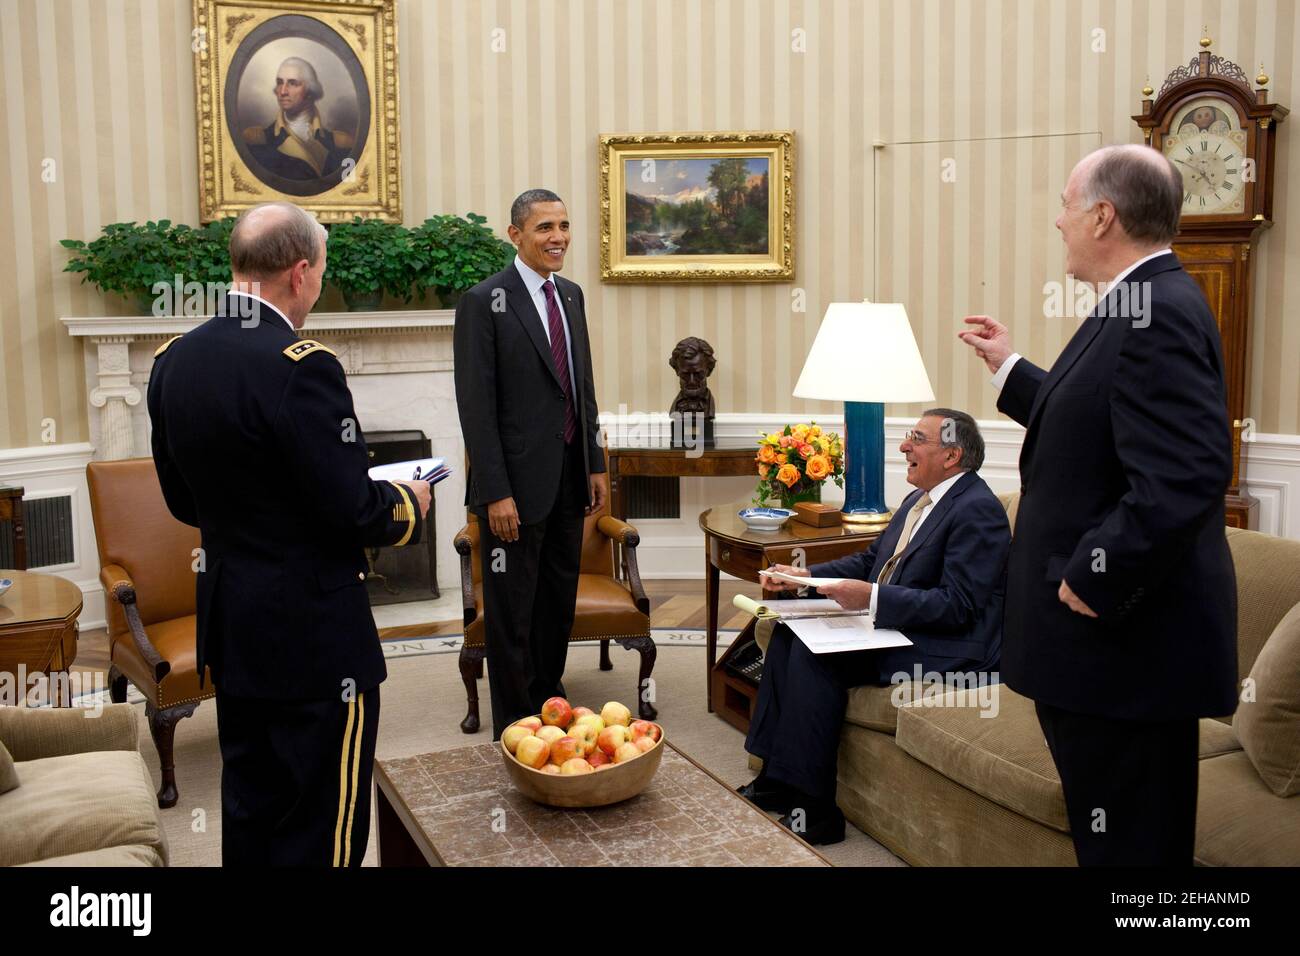 President Barack Obama meets with, from left, Gen. Martin Dempsey, Chairman of the Joint Chiefs of Staff, Defense Secretary Leon Panetta  and National Security Advisor Tom Donilon in the Oval Office, Nov. 22, 2011. Stock Photo